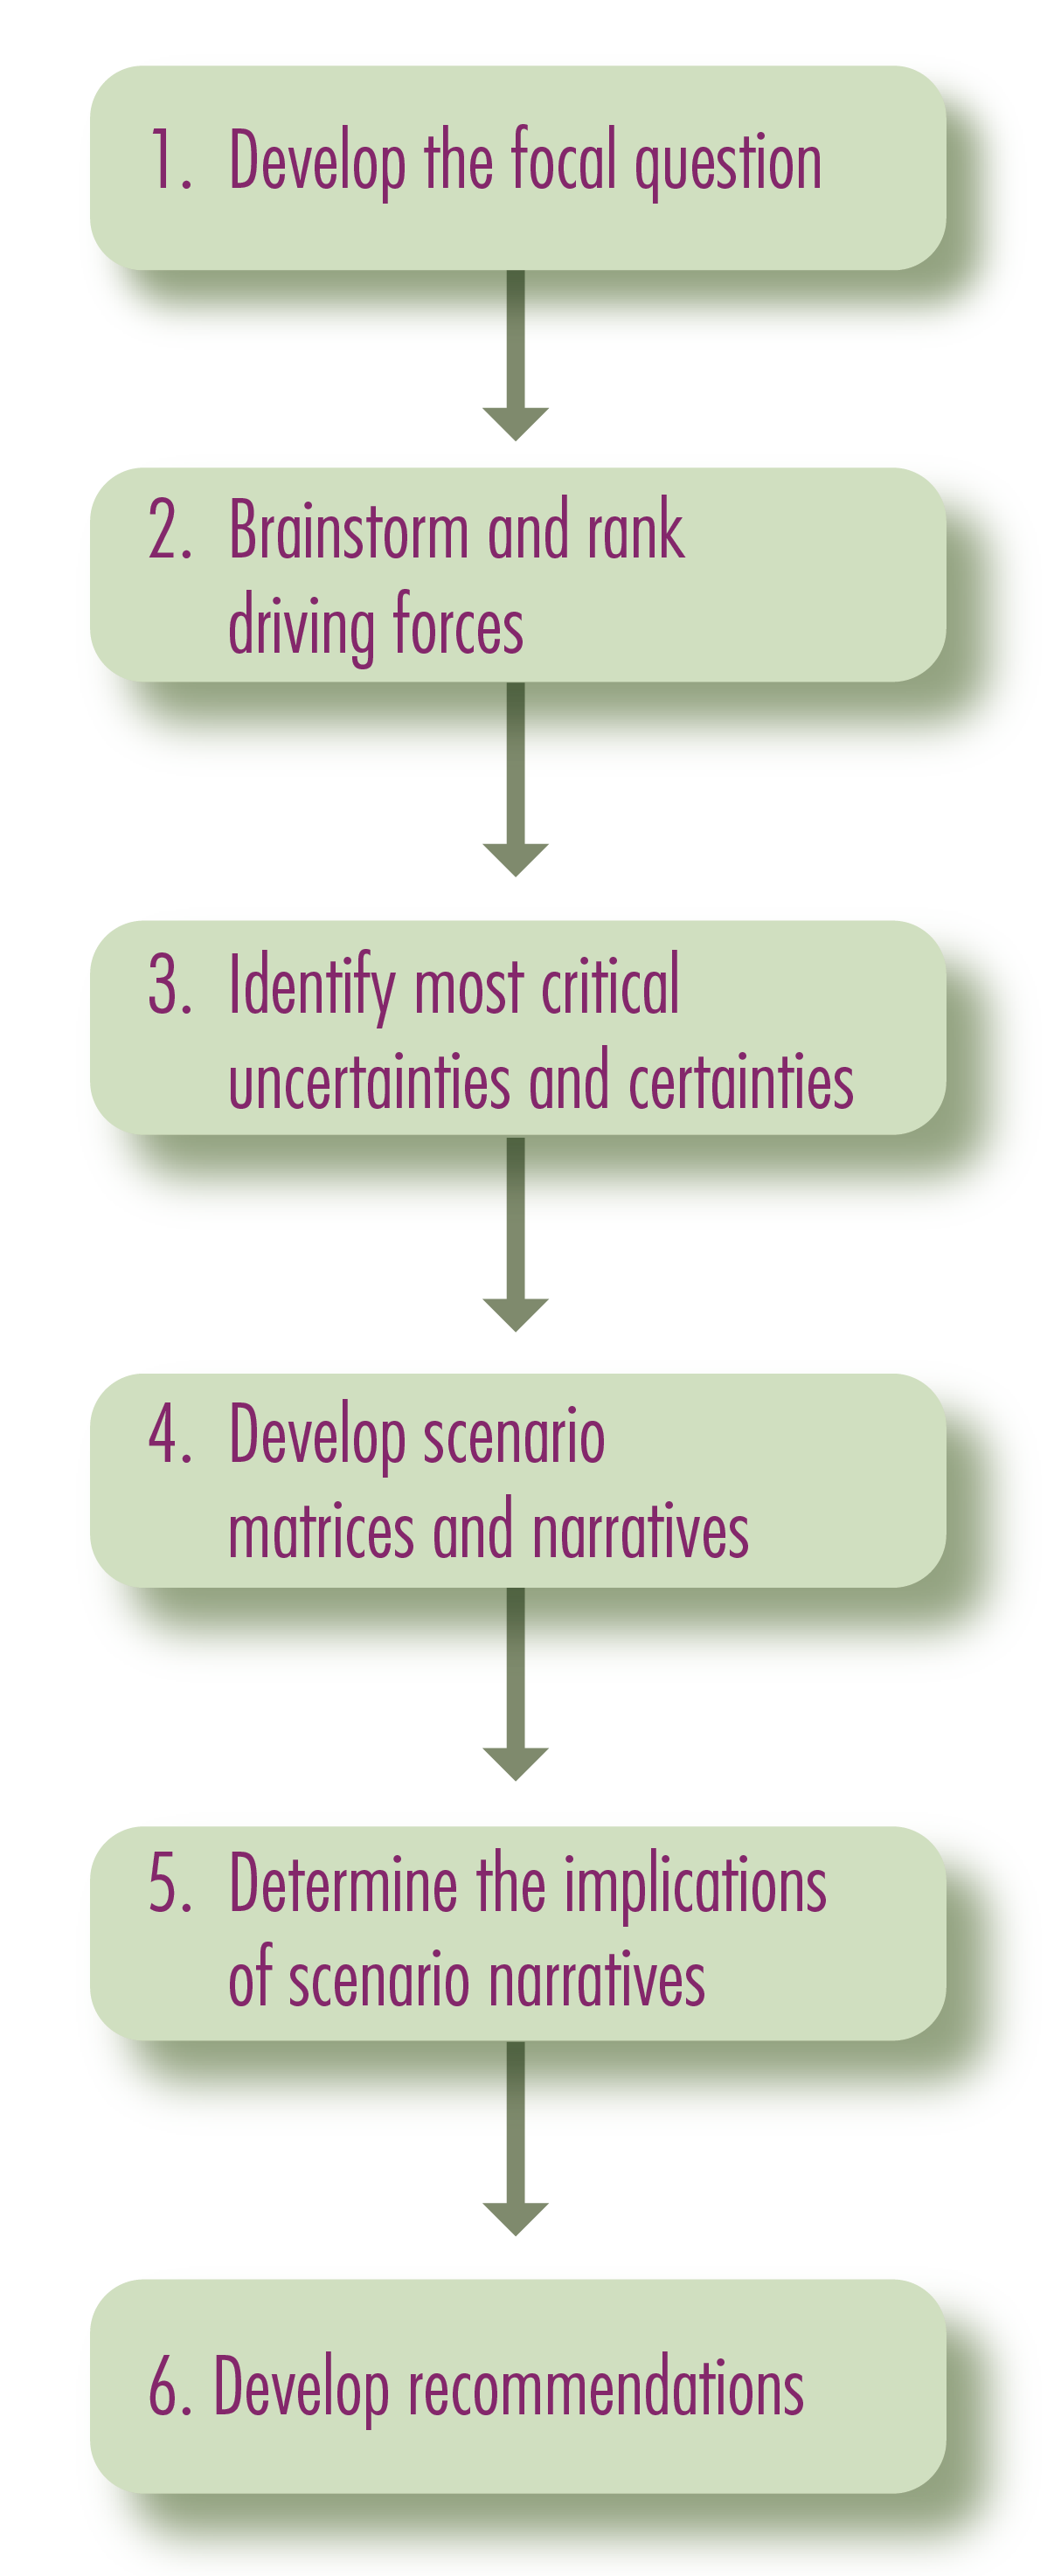 this is a flow chart showing the following 6 steps to an exploratory scenario planning process: 1. Develop the focal question. 2. Brainstorm and rank driving forces. 3. Identify most critical uncertainties and certainties. 4. Develop scenario matrices and narratives. 5. Determine the implications of scenario narratives 6. Develop recommendations